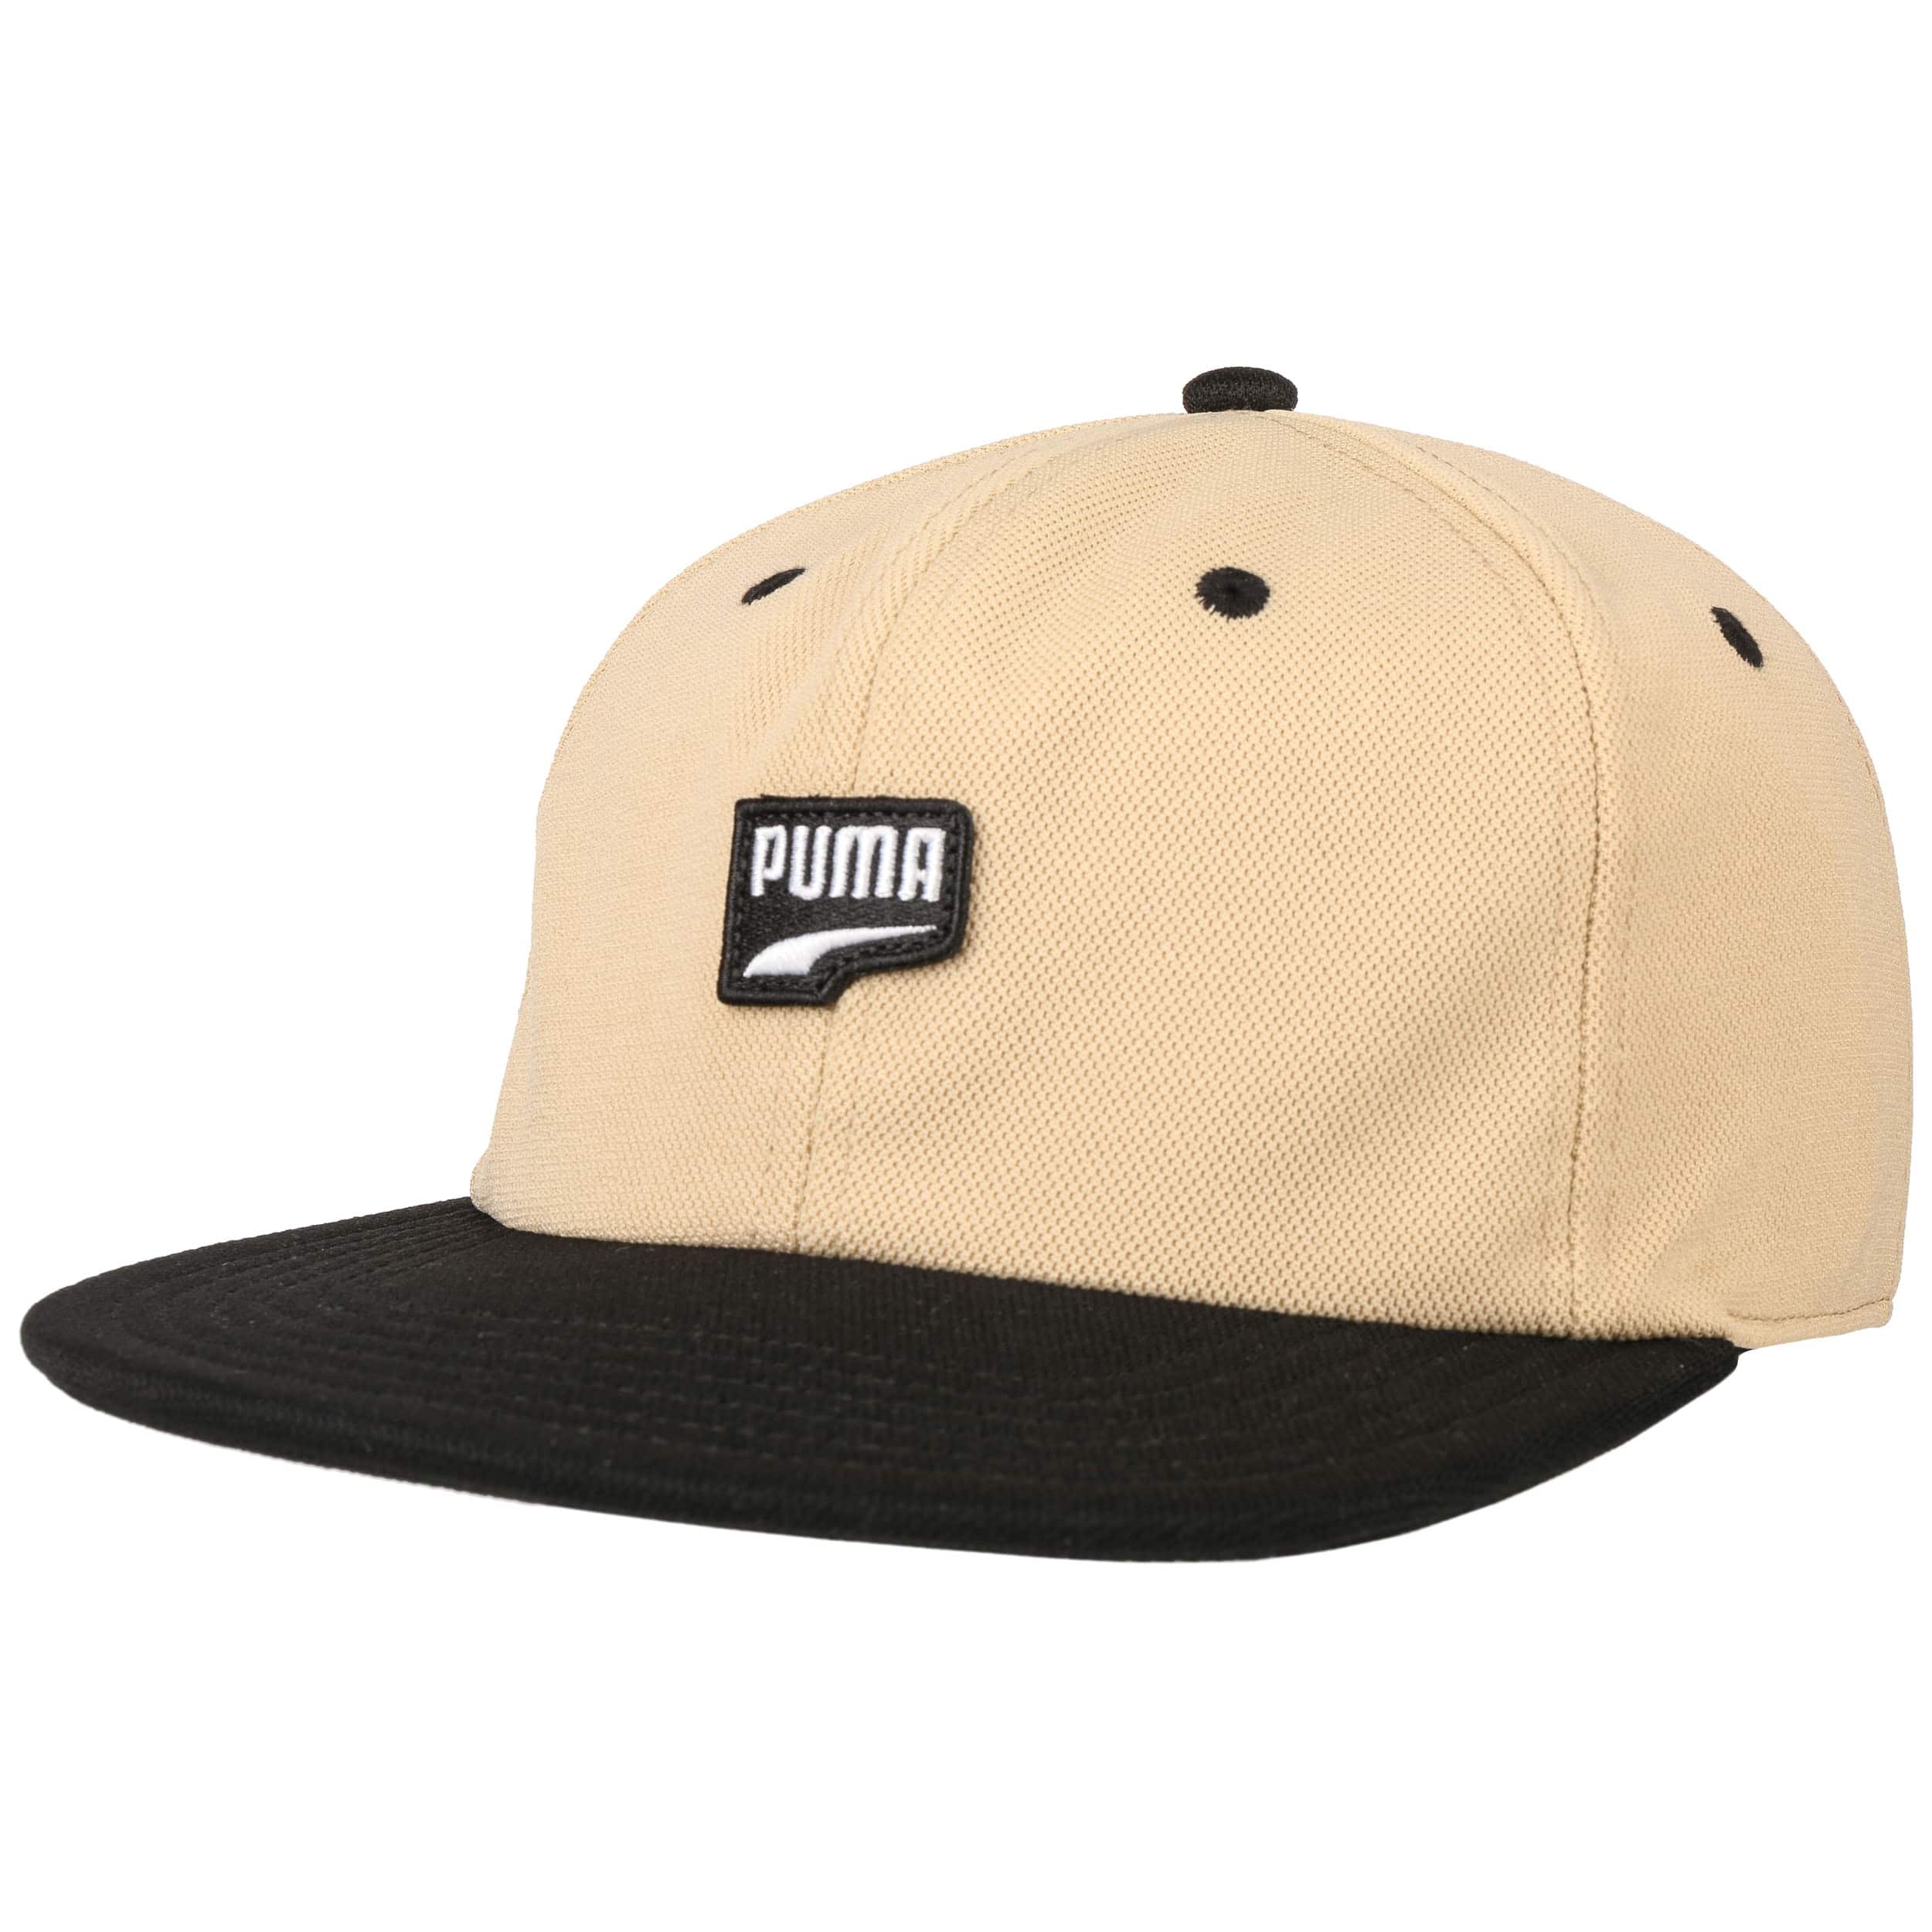 Archive Downtown FB by 25,95 € PUMA Cap 